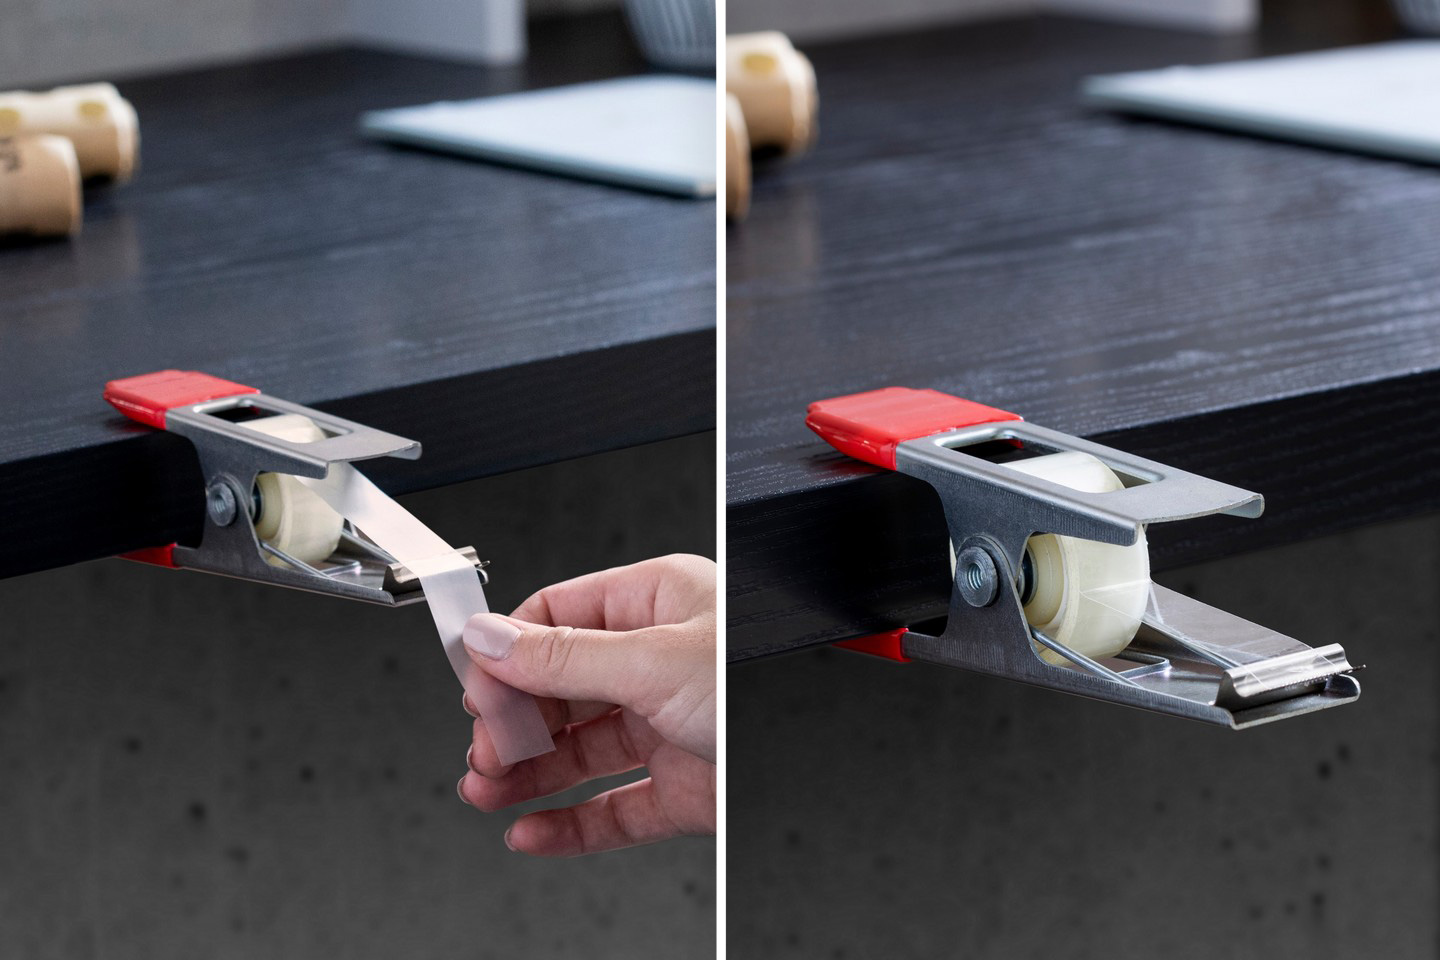 #Clothespin-inspired tape dispenser clamps right onto the side of your study table